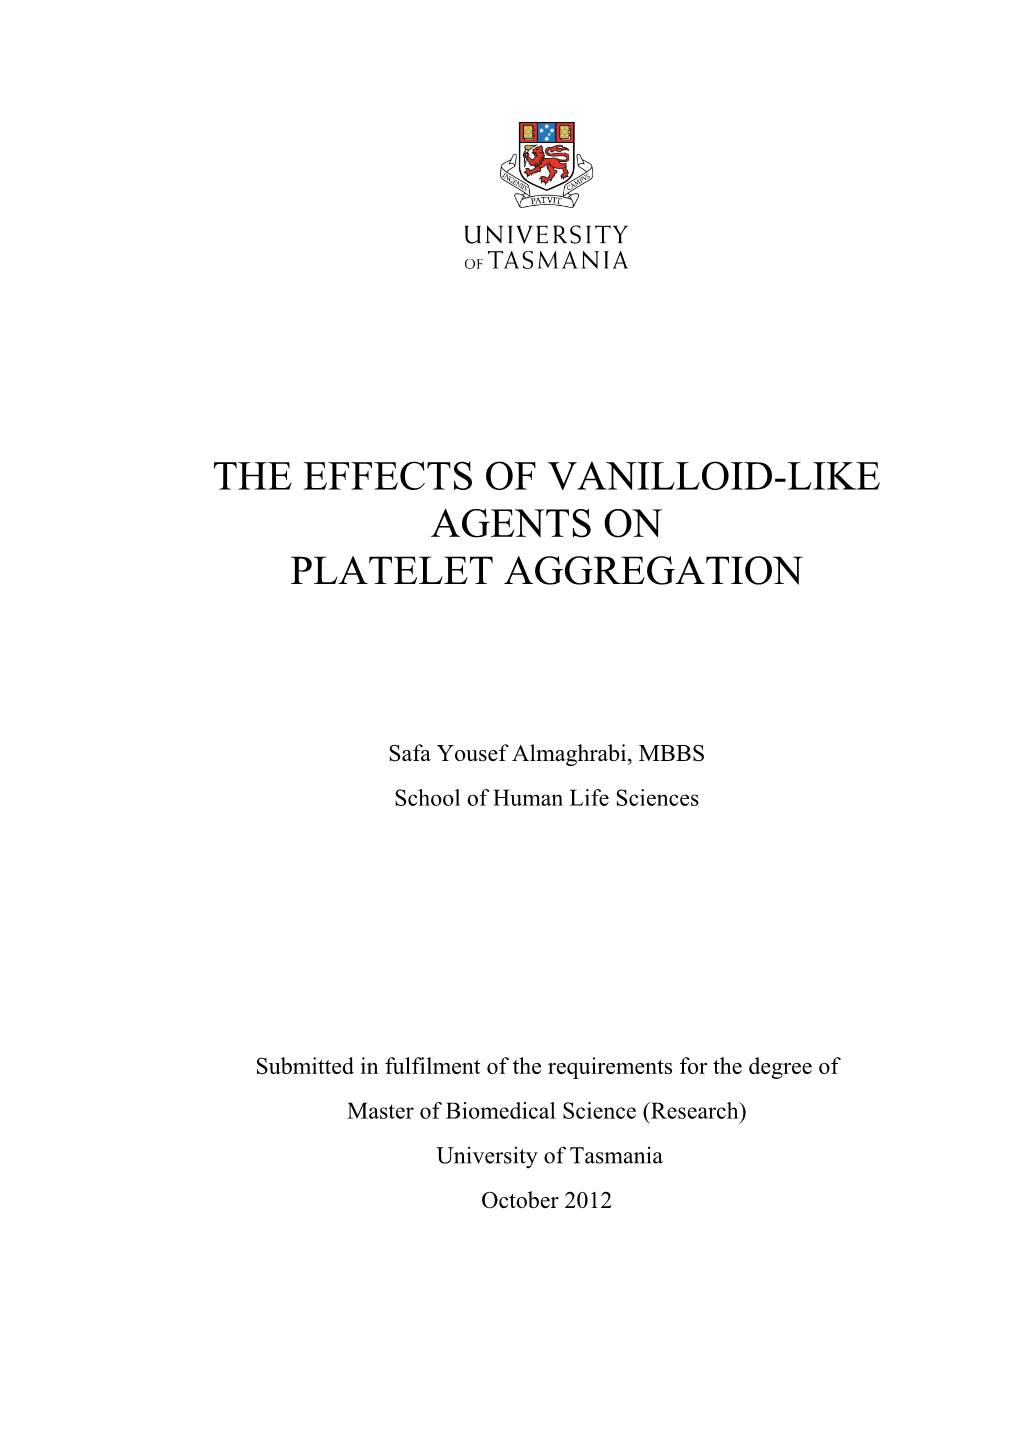 The Effects of Vanilloid-Like Agents on Platelet Aggregation